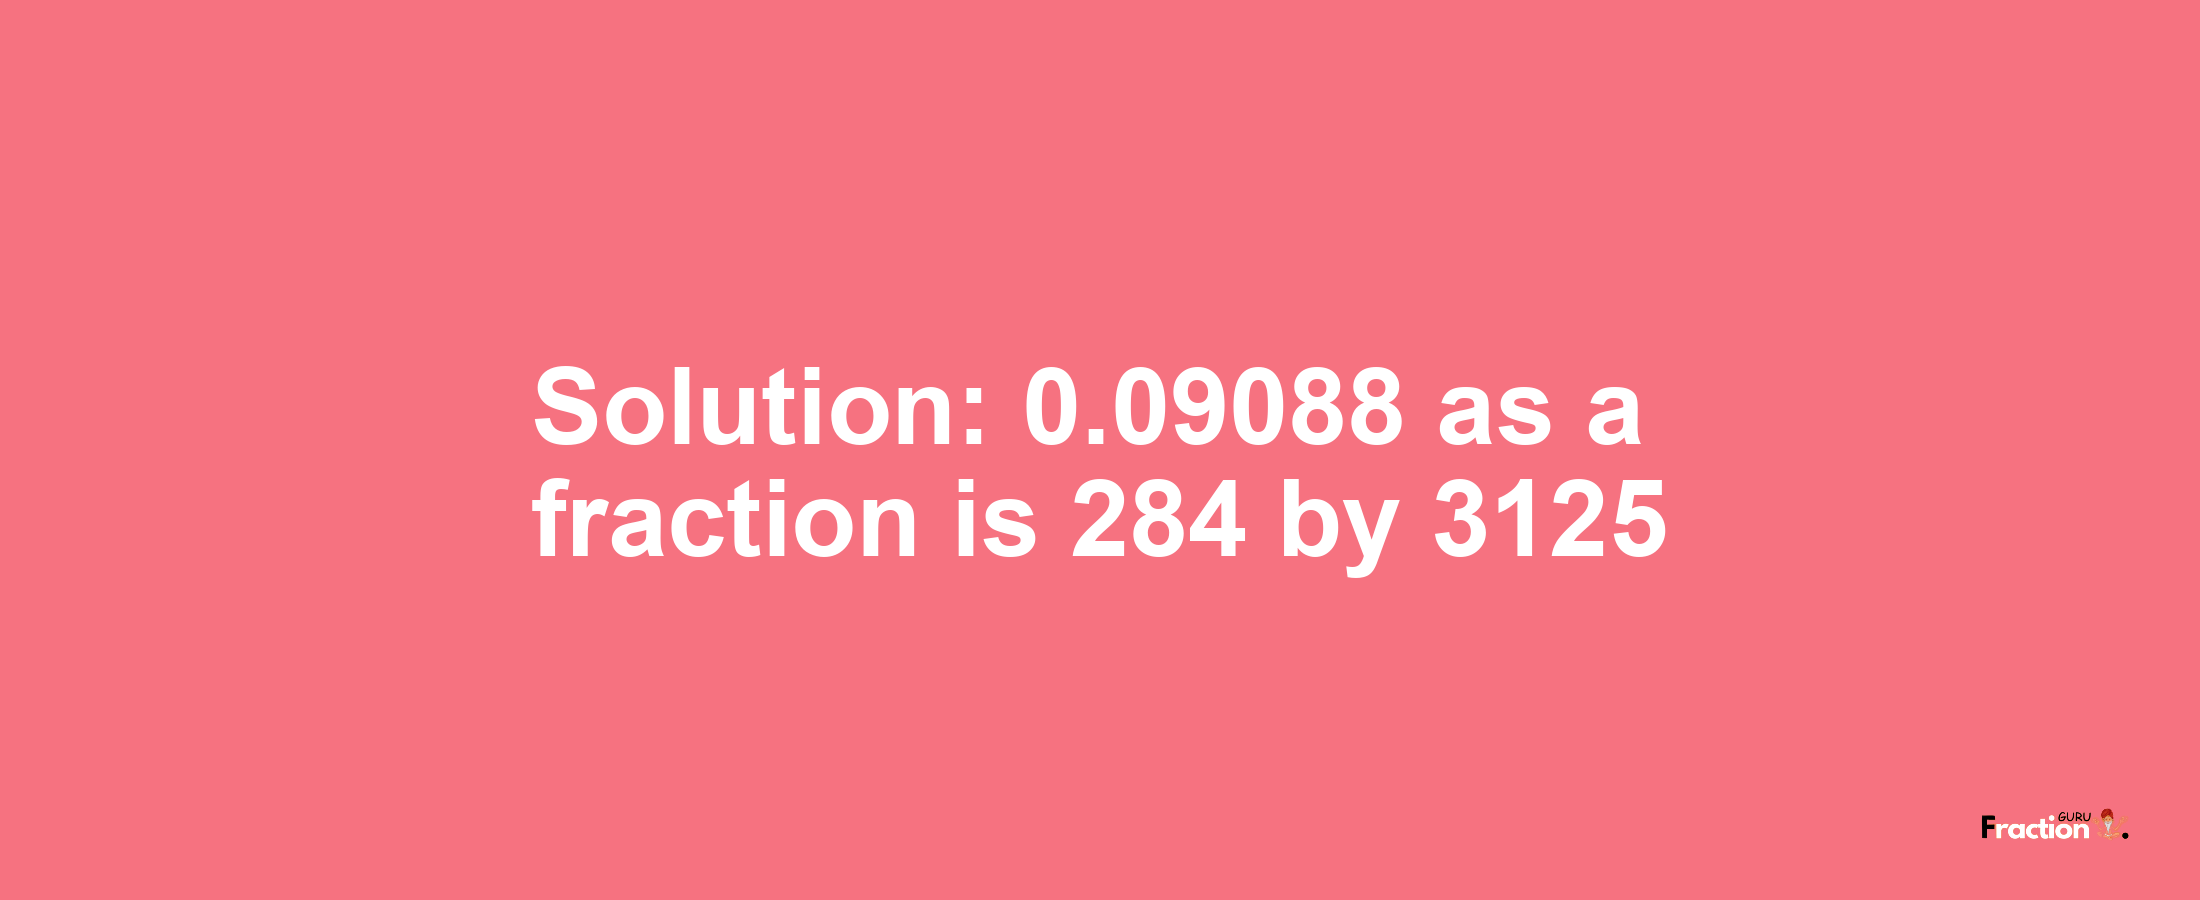 Solution:0.09088 as a fraction is 284/3125